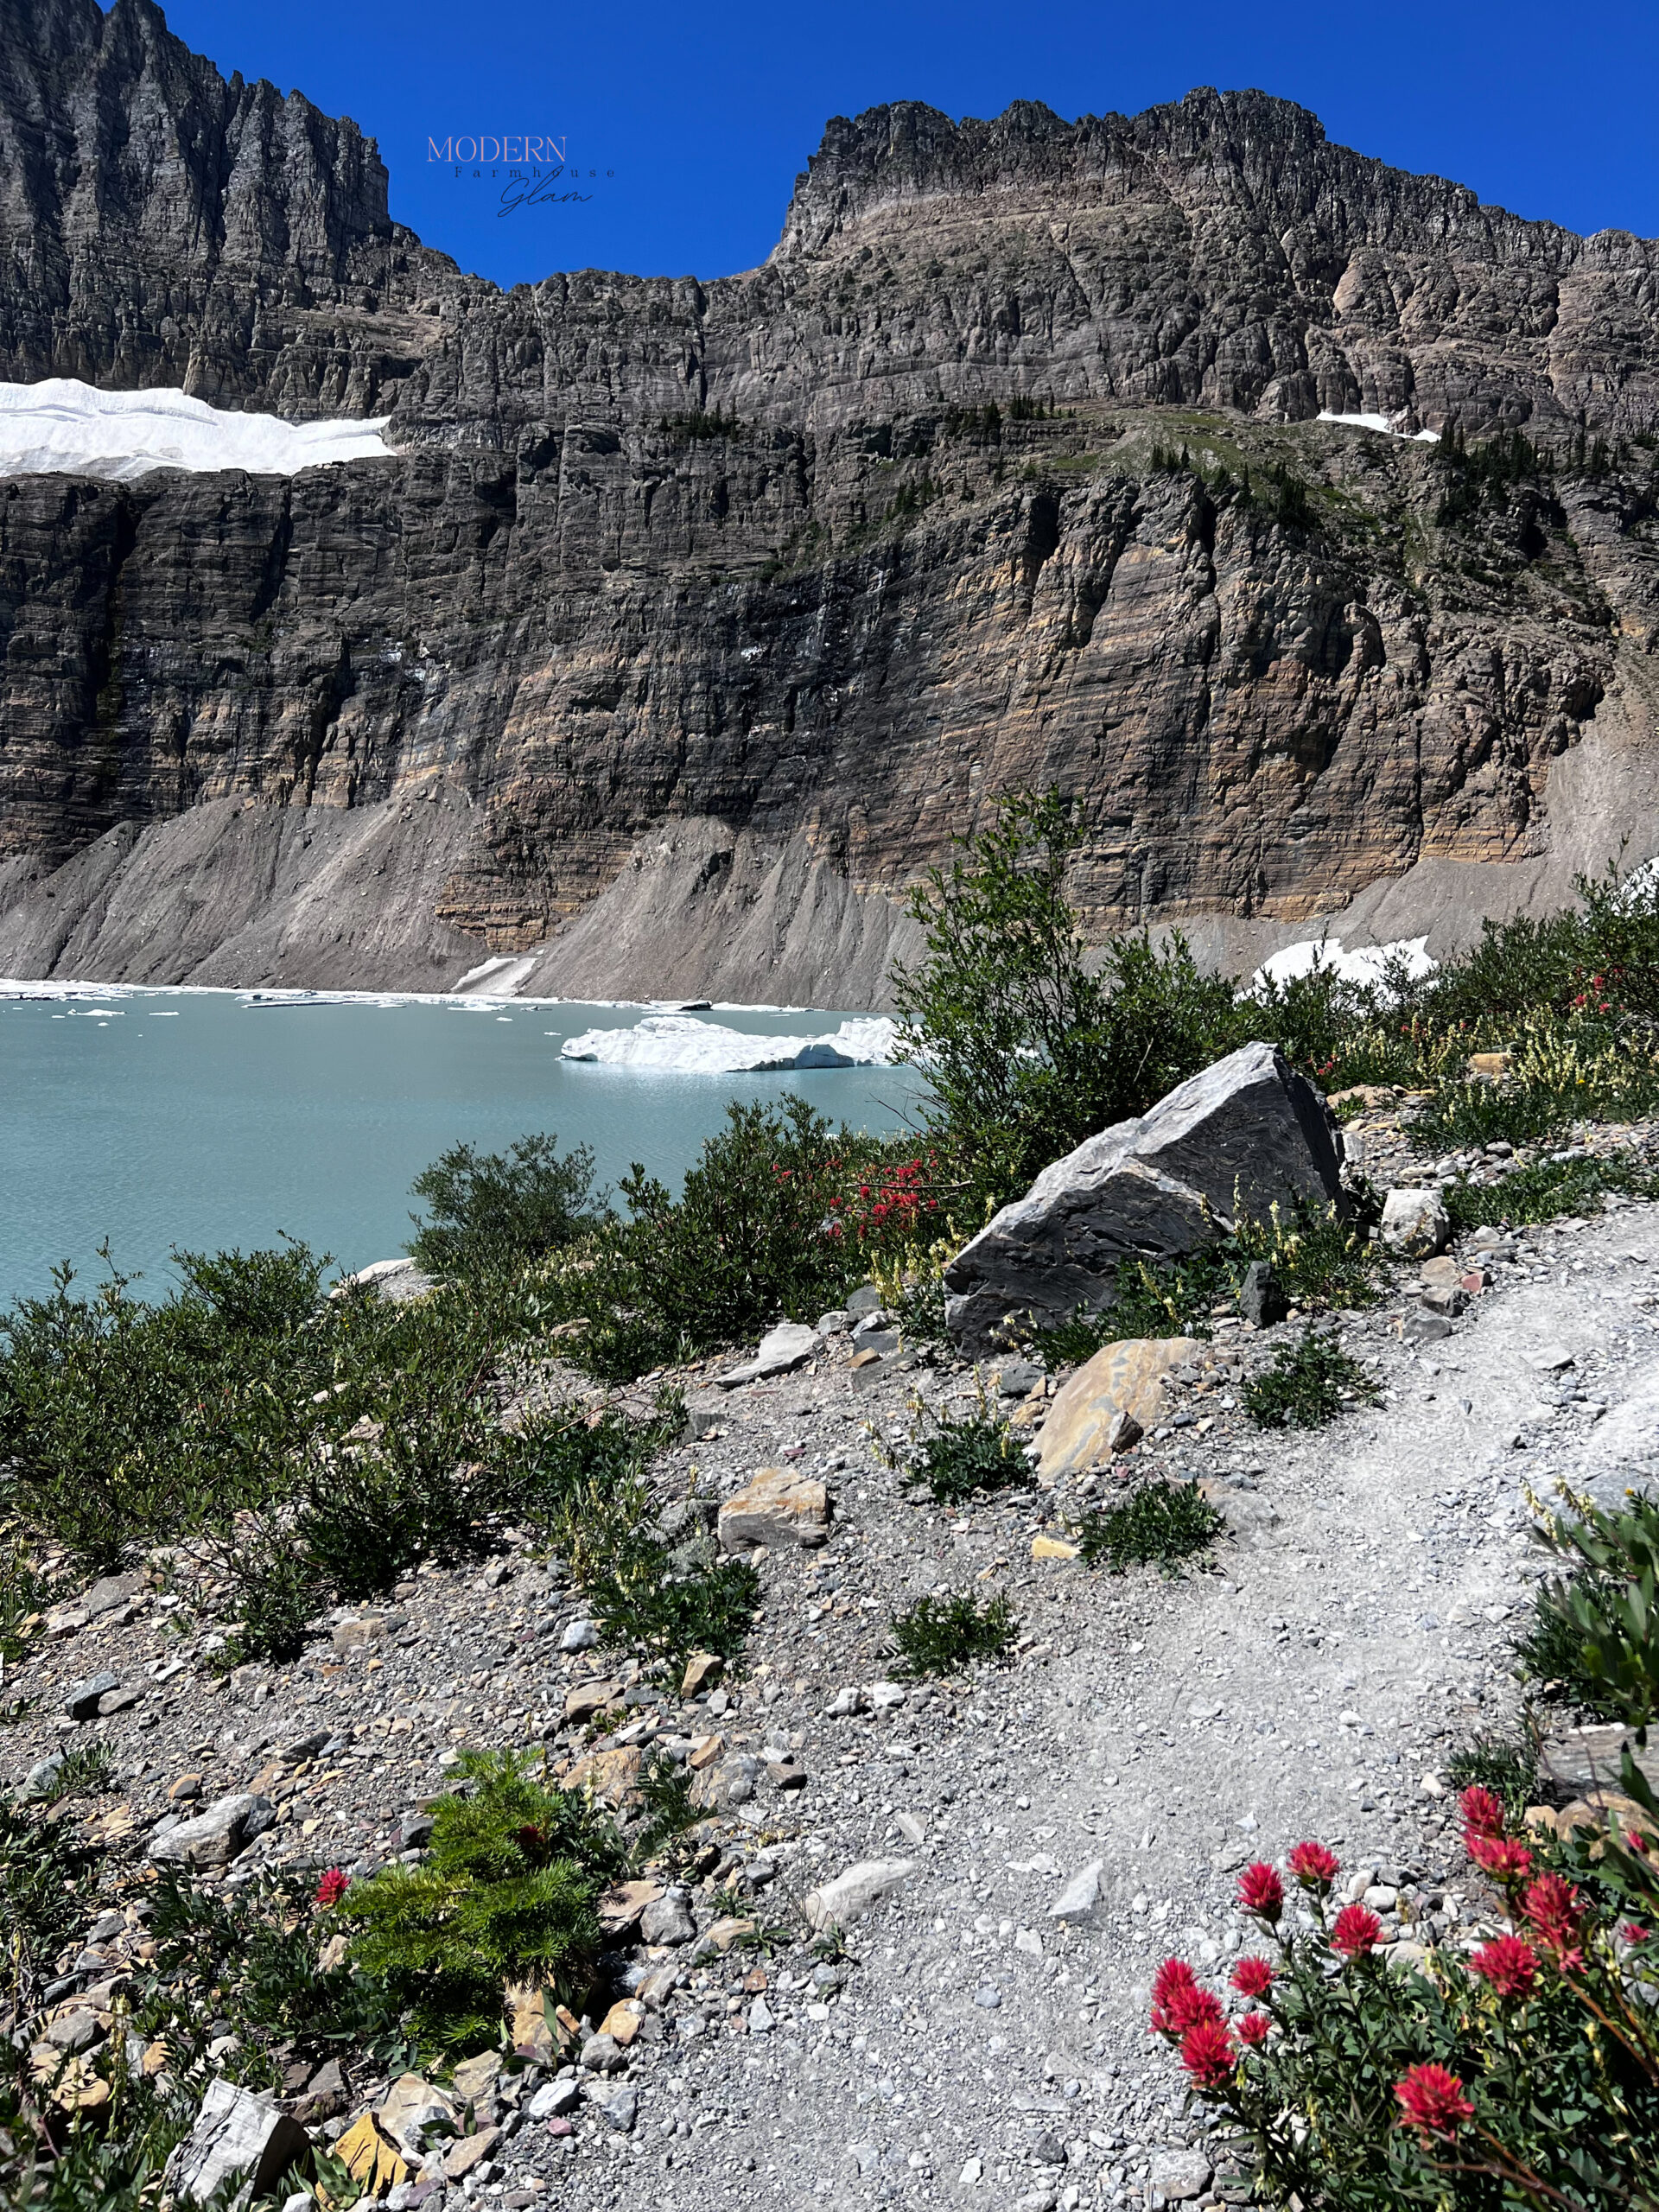 I love the contrast of the red wildflowers with the icy clue water of Grinell Glacier